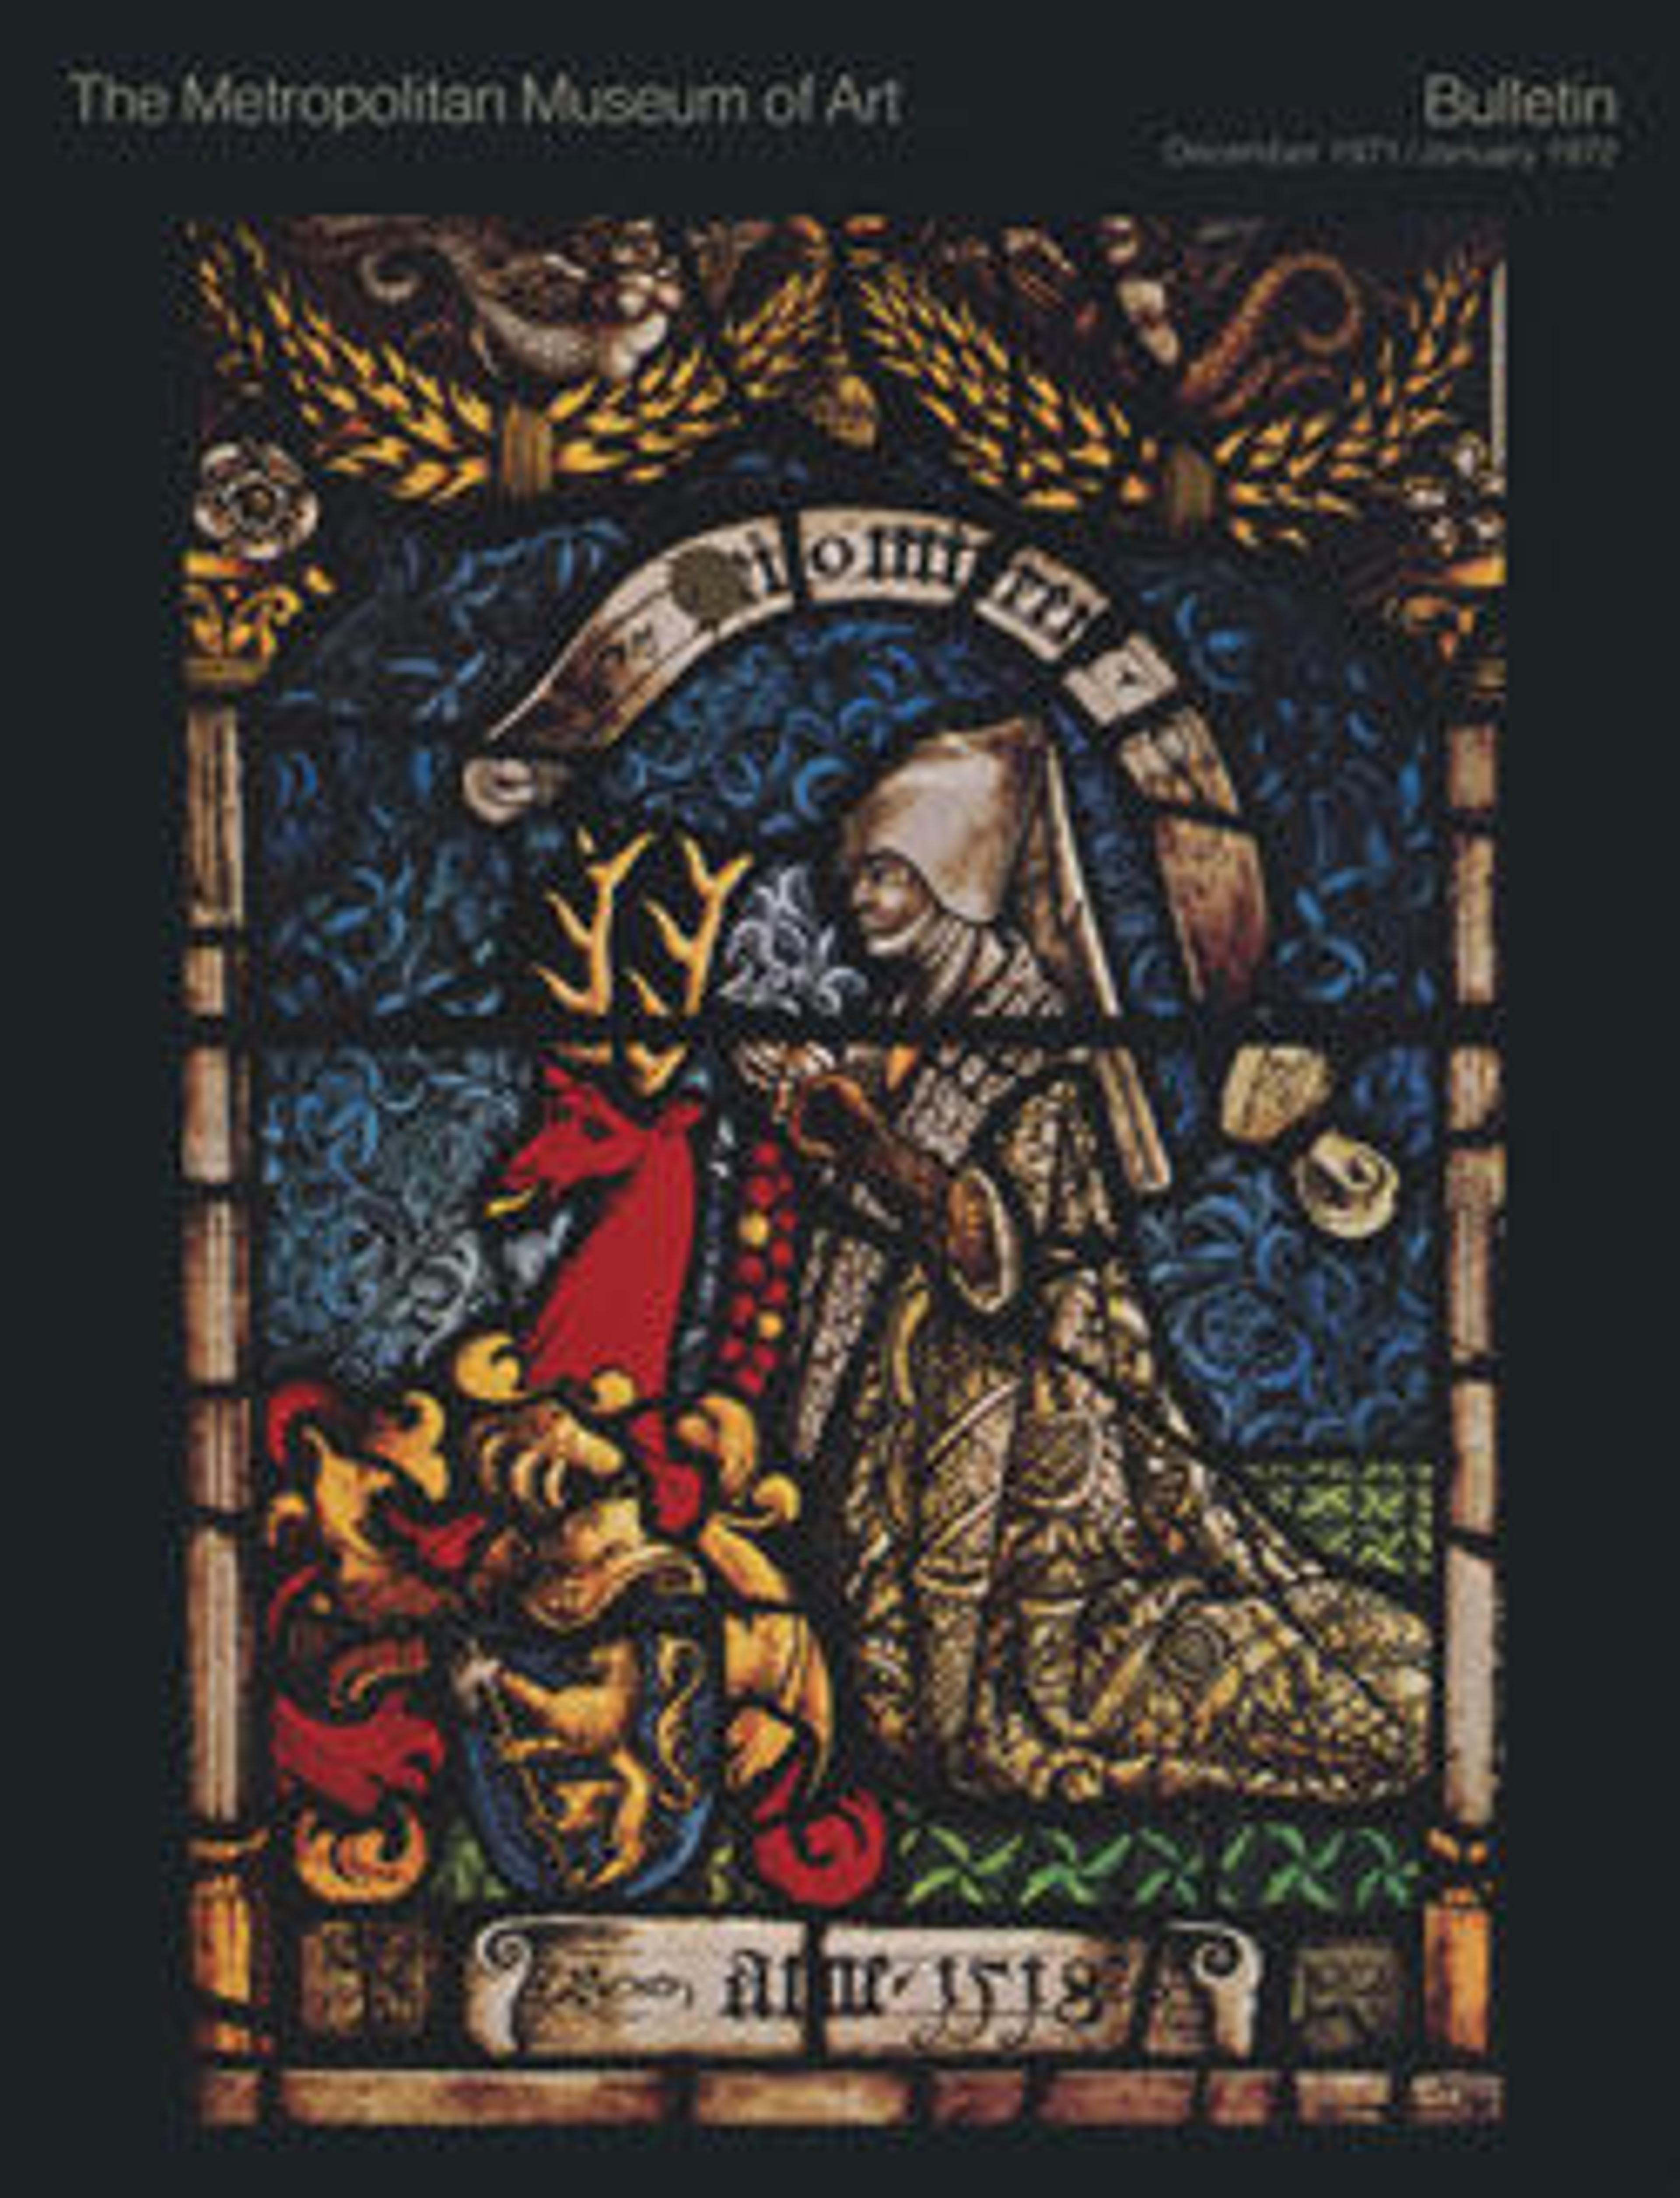 "Stained-Glass Windows": The Metropolitan Museum of Art Bulletin, v. 30, no. 3 (December, 1971–January, 1972)